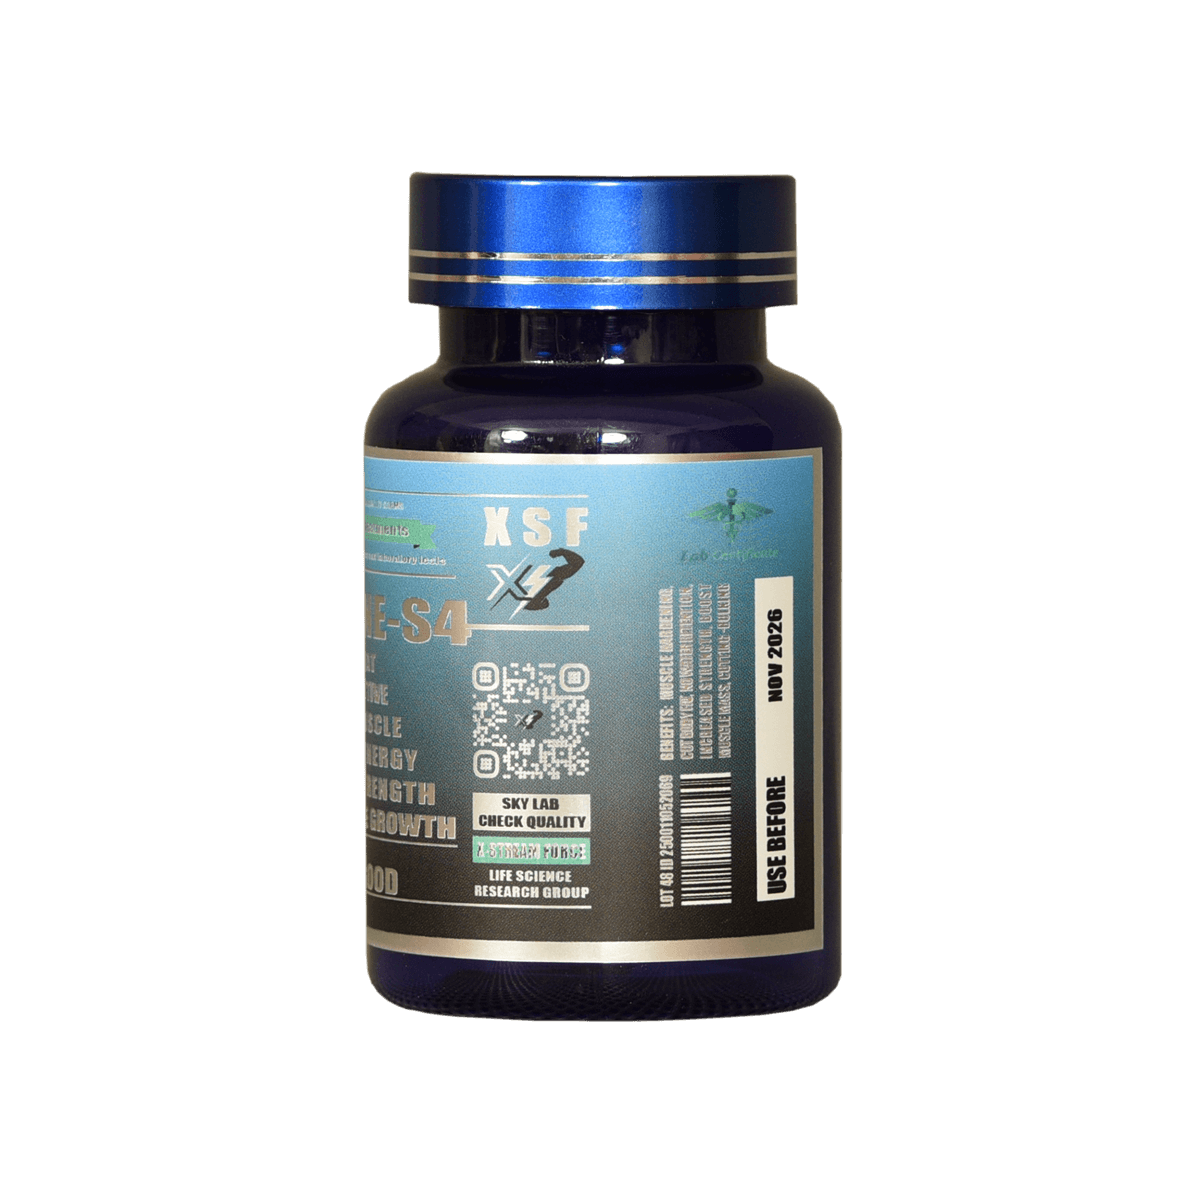 andarine-s4-capsules-100-15mg-muscle shop-xstreamforce-for cardio-strength-fat cleaner-hard and dry-for ladies-buy on line✦s4sarms✦ fitness supplements | XSF Store